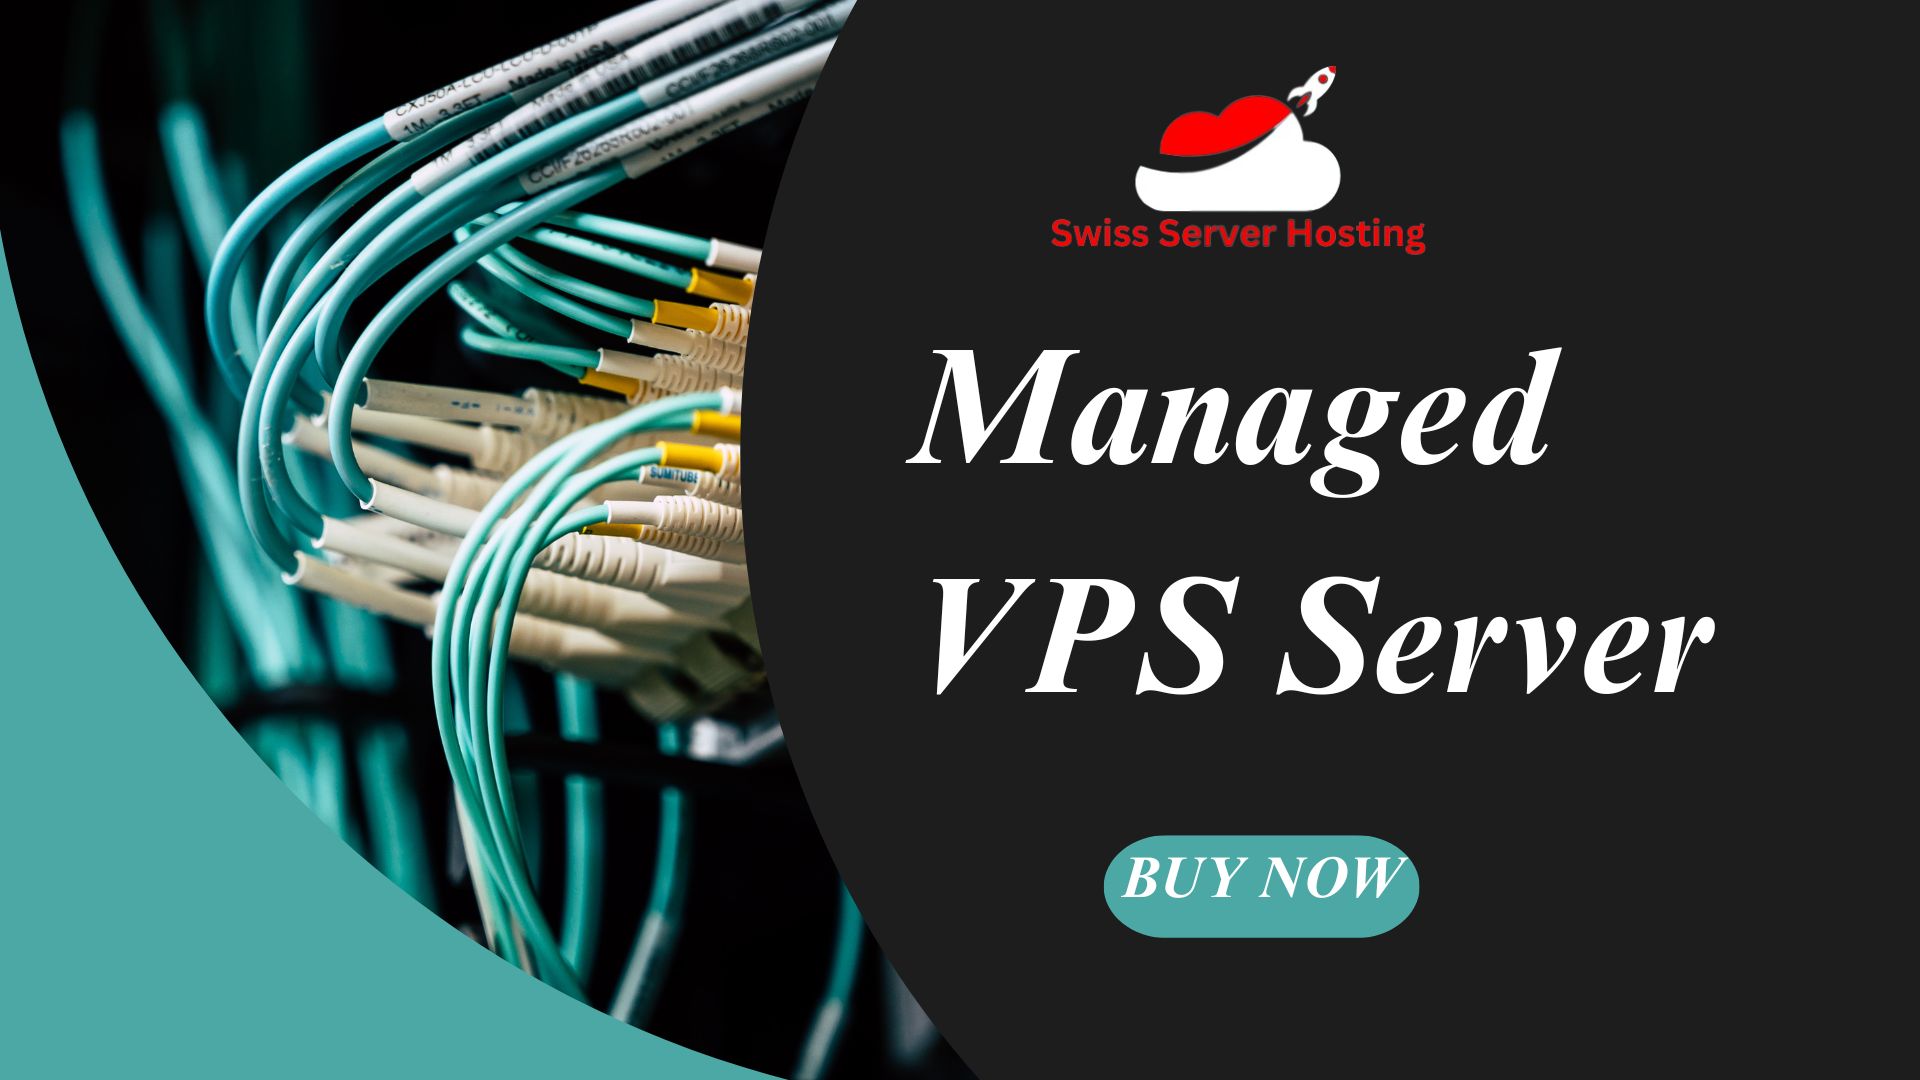 Supporting Your Digital Journey with Managed VPS Server